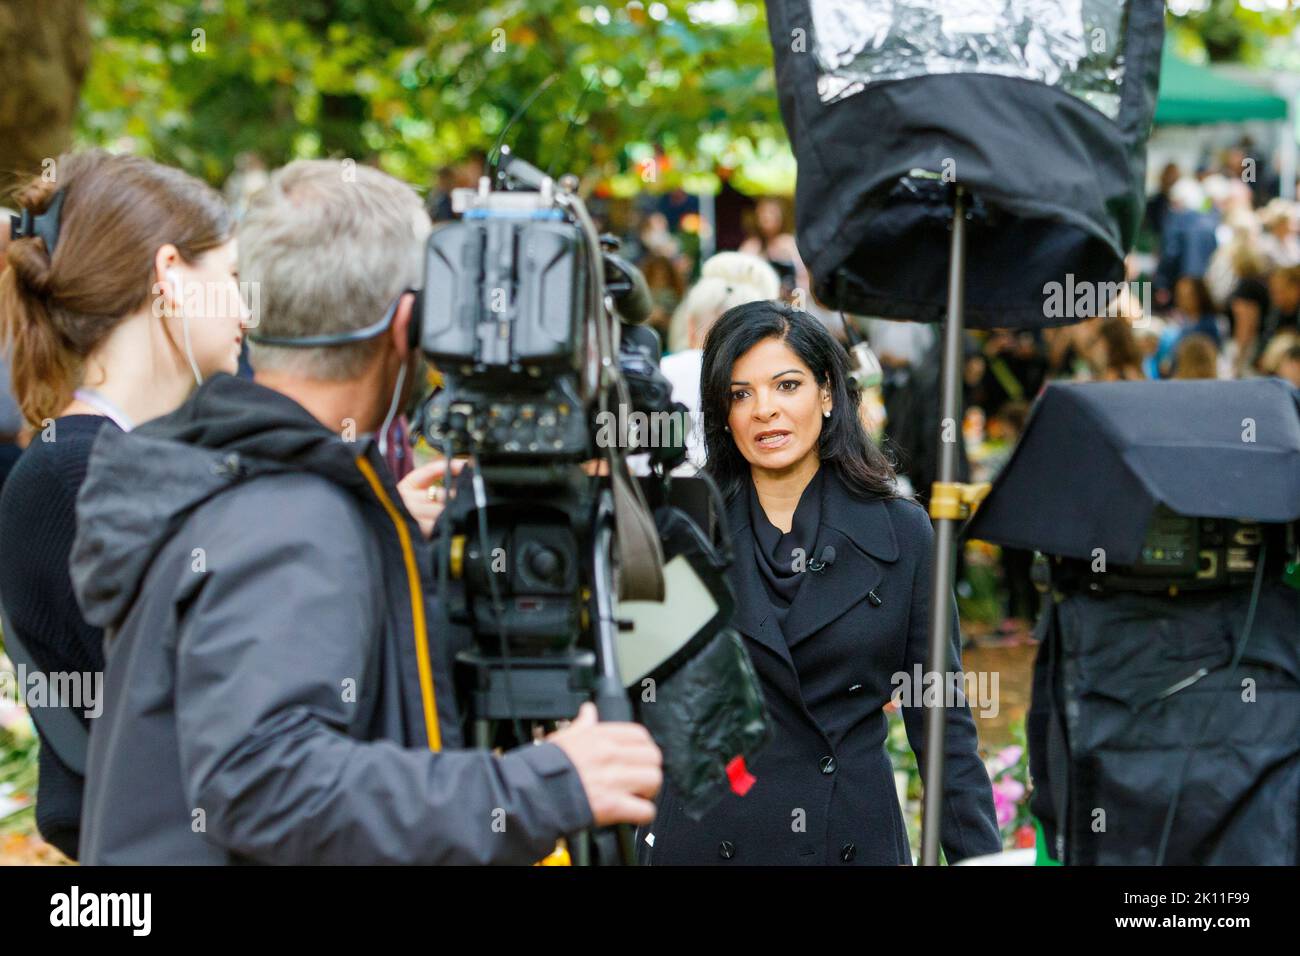 London, UK. 14th Sep, 2022. As crowds of people came to London to watch Her Majesty the Queen's coffin being transported to the Palace of Westminster, a foreign tv news crew are pictured as they do a live broadcast in Green Park, London. Credit: Lynchpics/Alamy Live News Stock Photo